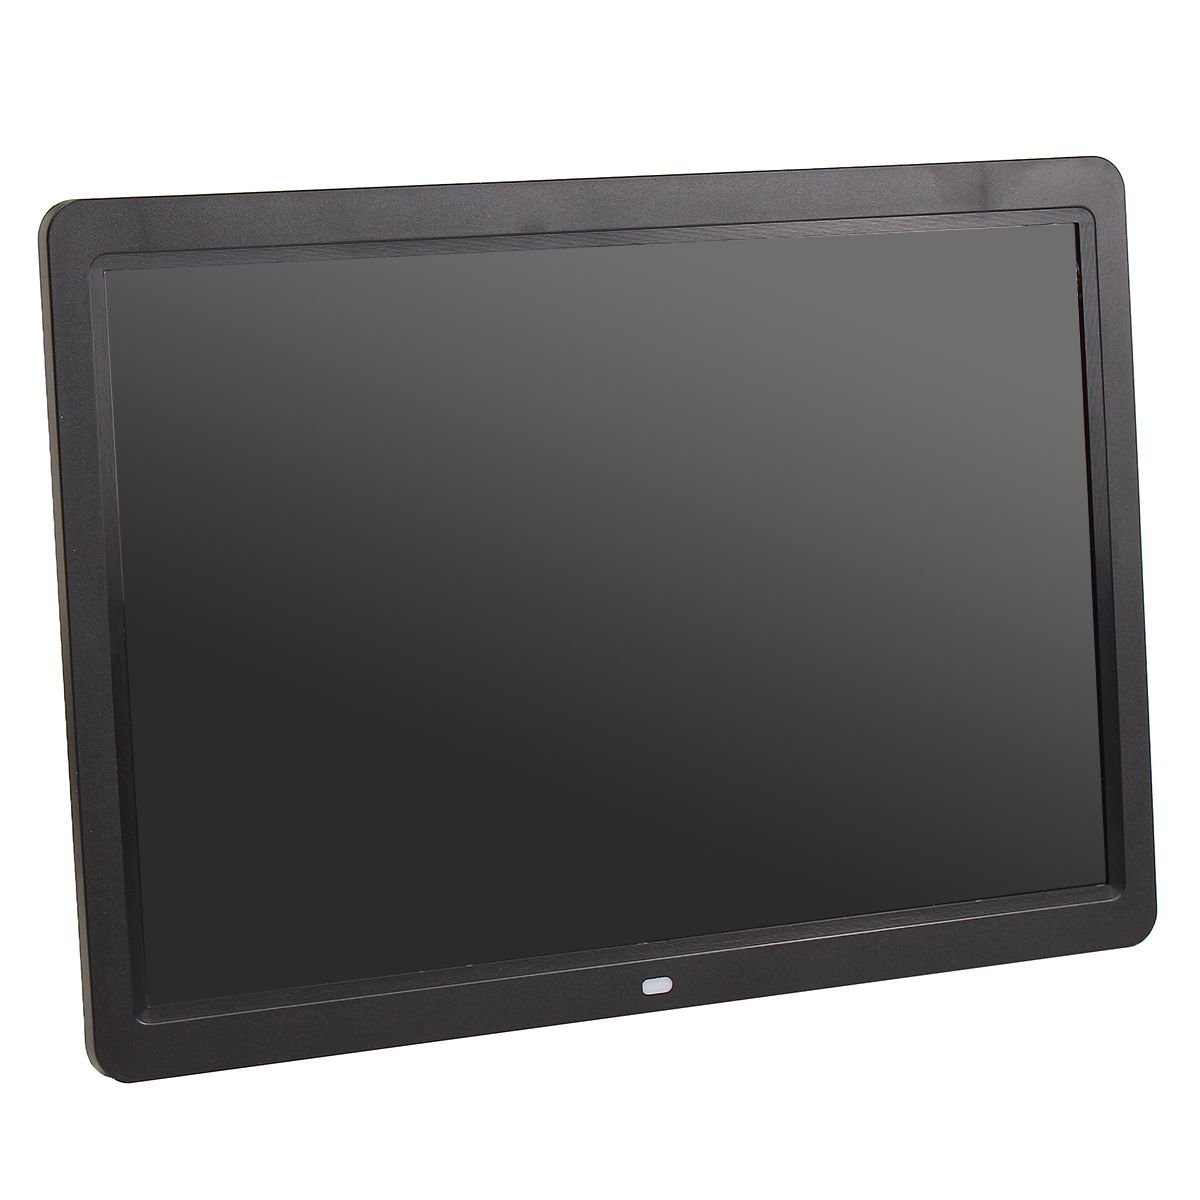 156-Inch-Full-HD-Digital-Photo-Frame-Picture-LED-Media-Movie-Album-Play-with-Remote-Control-1347689